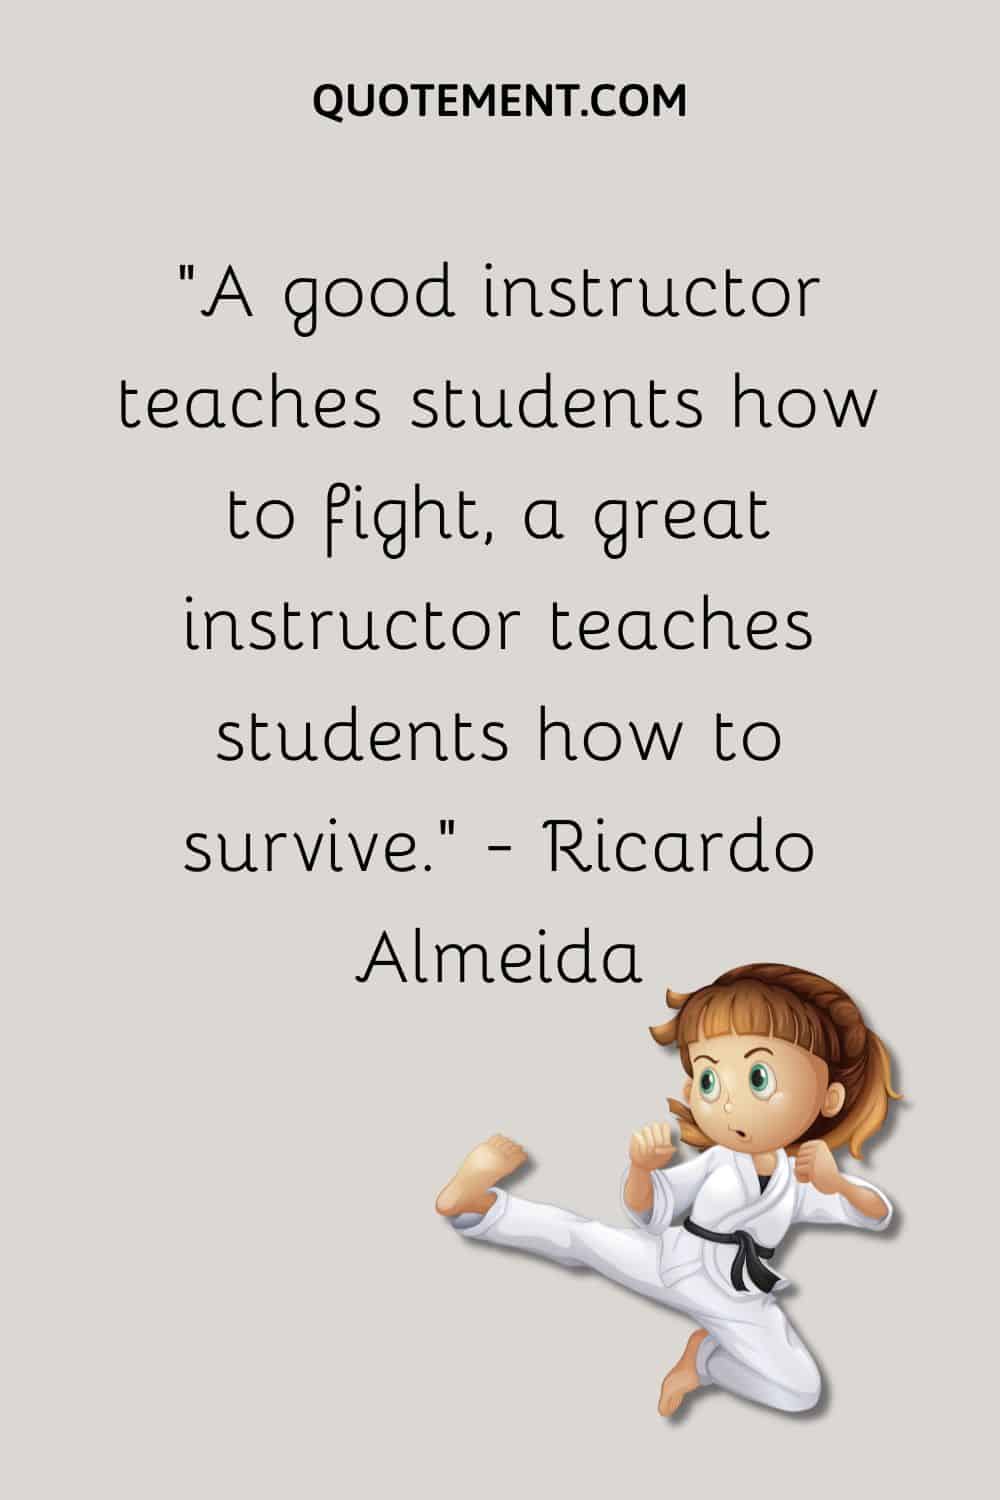 A good instructor teaches students how to fight